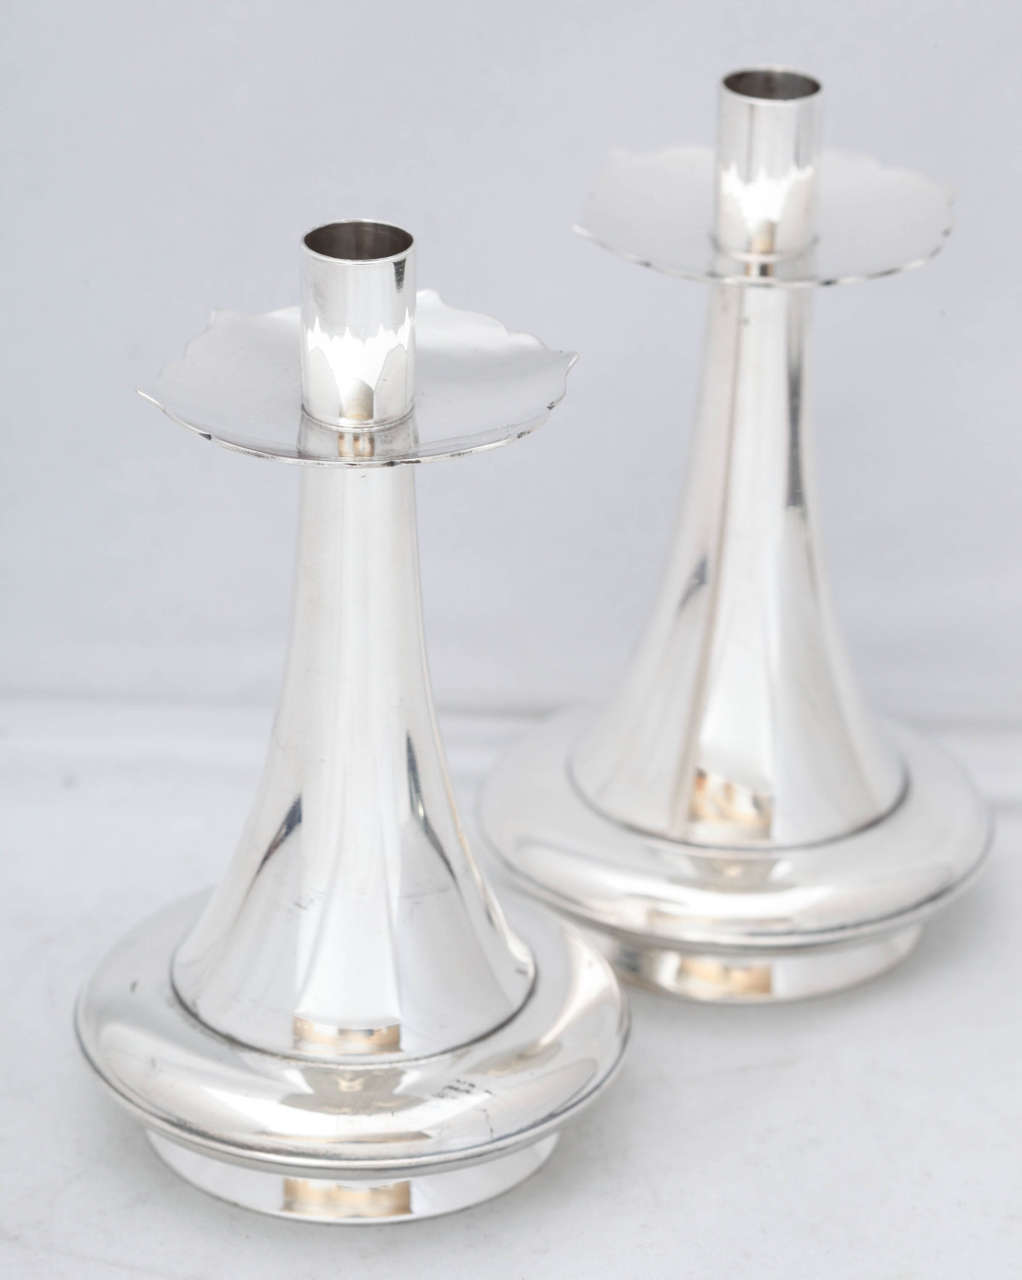 Unusual pair of Mid-Century Modern,  sterling silver candlesticks (having a Danish influence), The Gorham Corp., Providence, Rhode Island, circa 1950s. 5